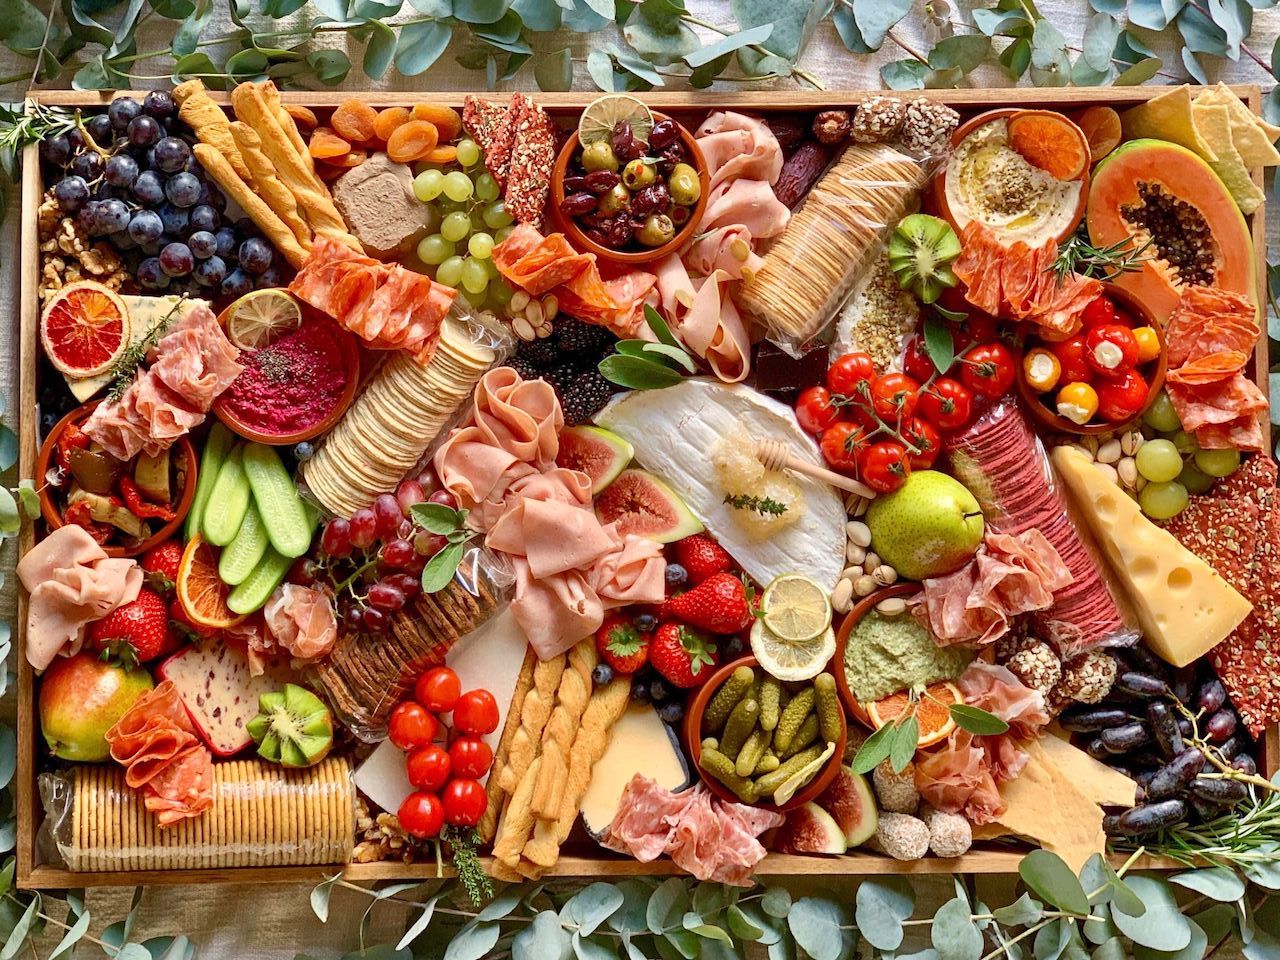 The Best Charcuterie Board Ideas For The Holidays (24 Themes & Ideas)